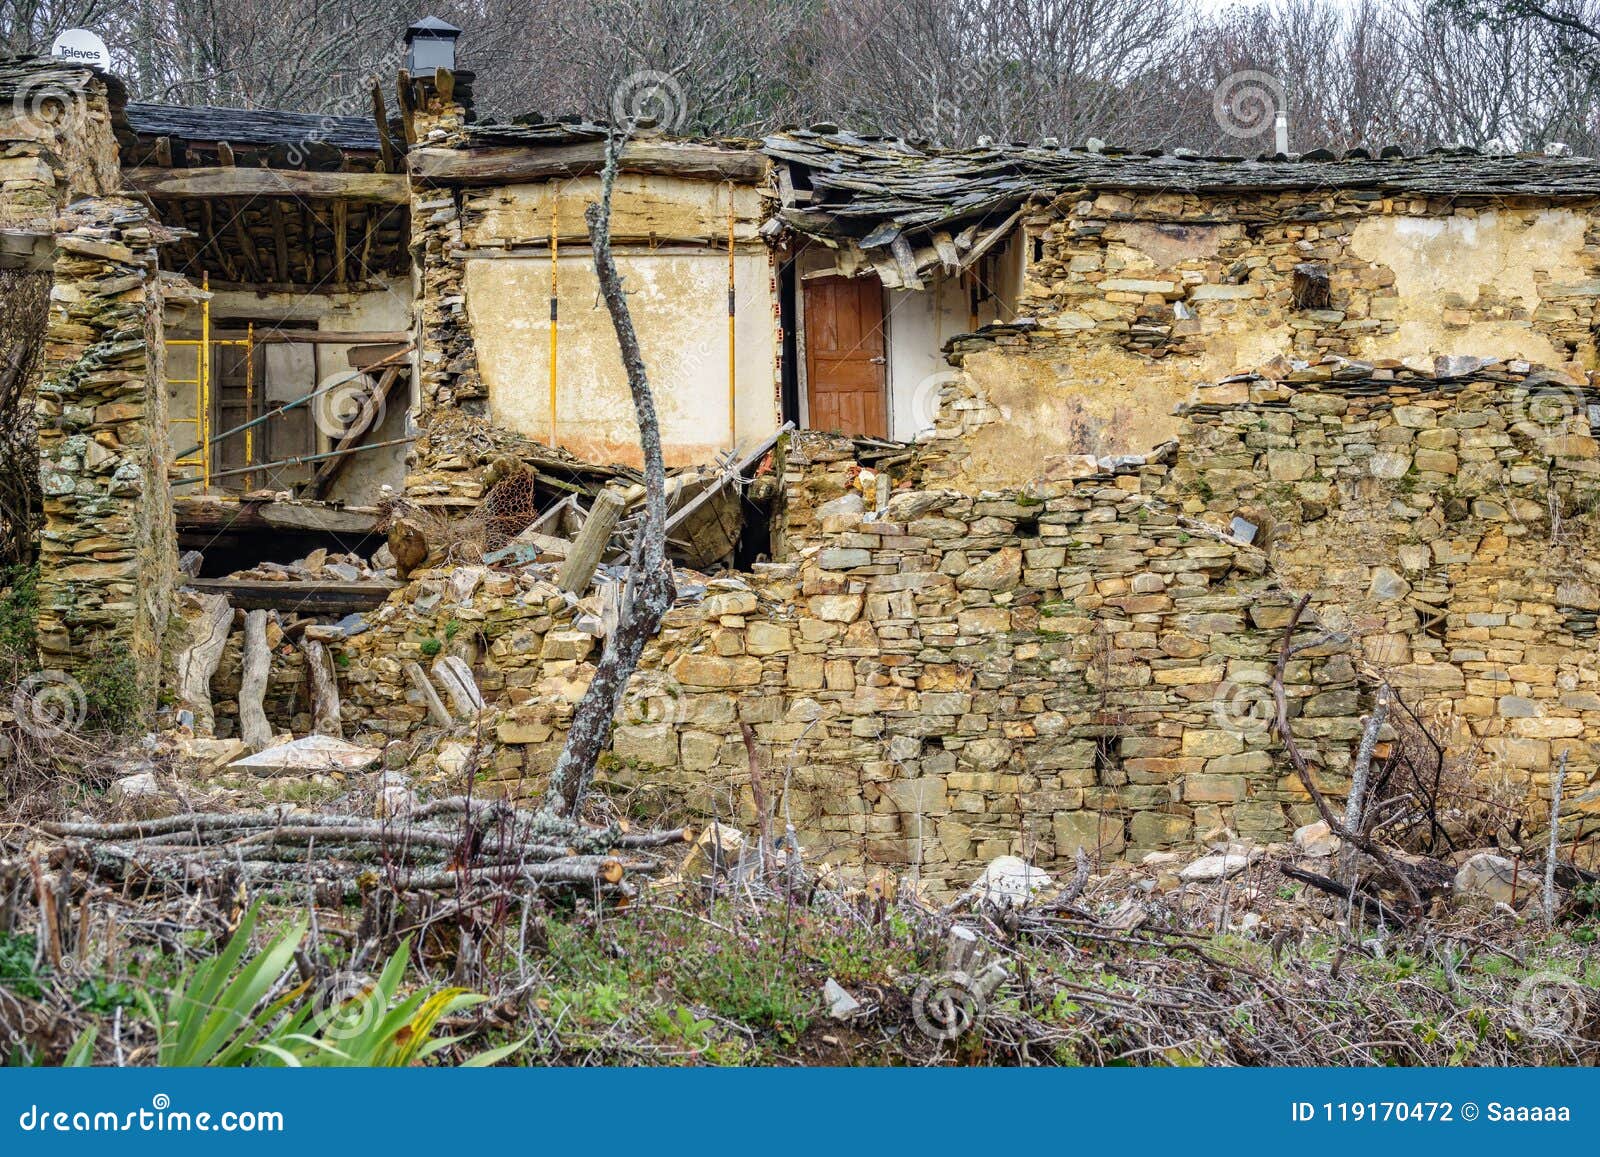 Old ruined houses stock photo. Image of fallen, danger - 119170472